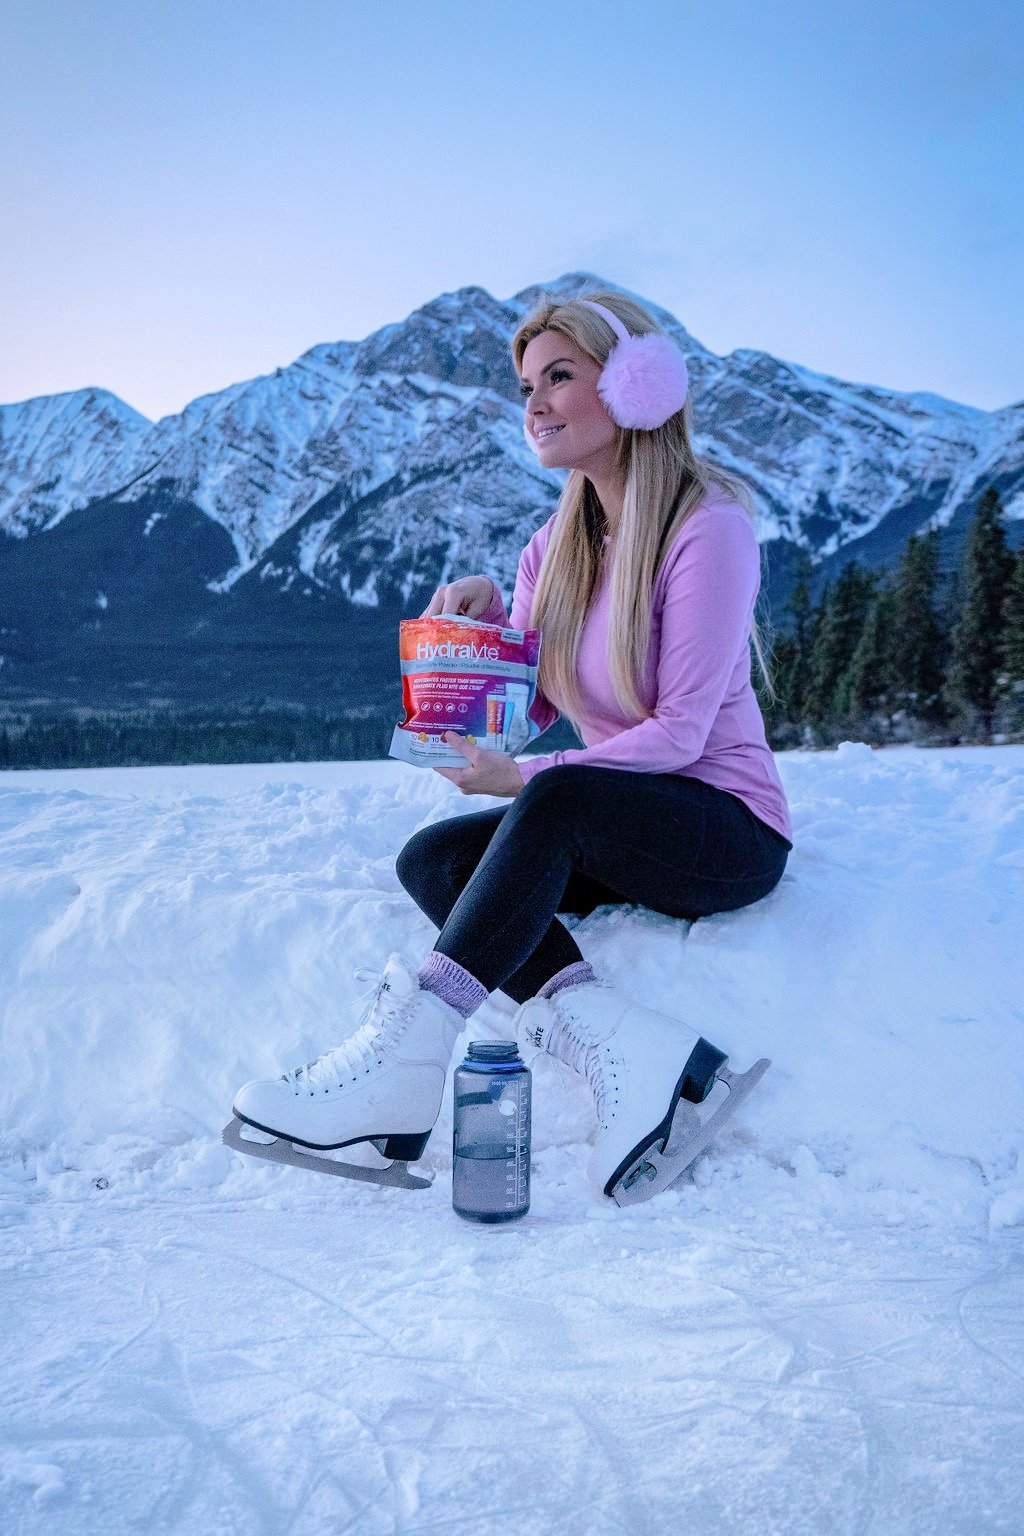 Staying hydrated in the winter and treating dehydration with Hydralyte